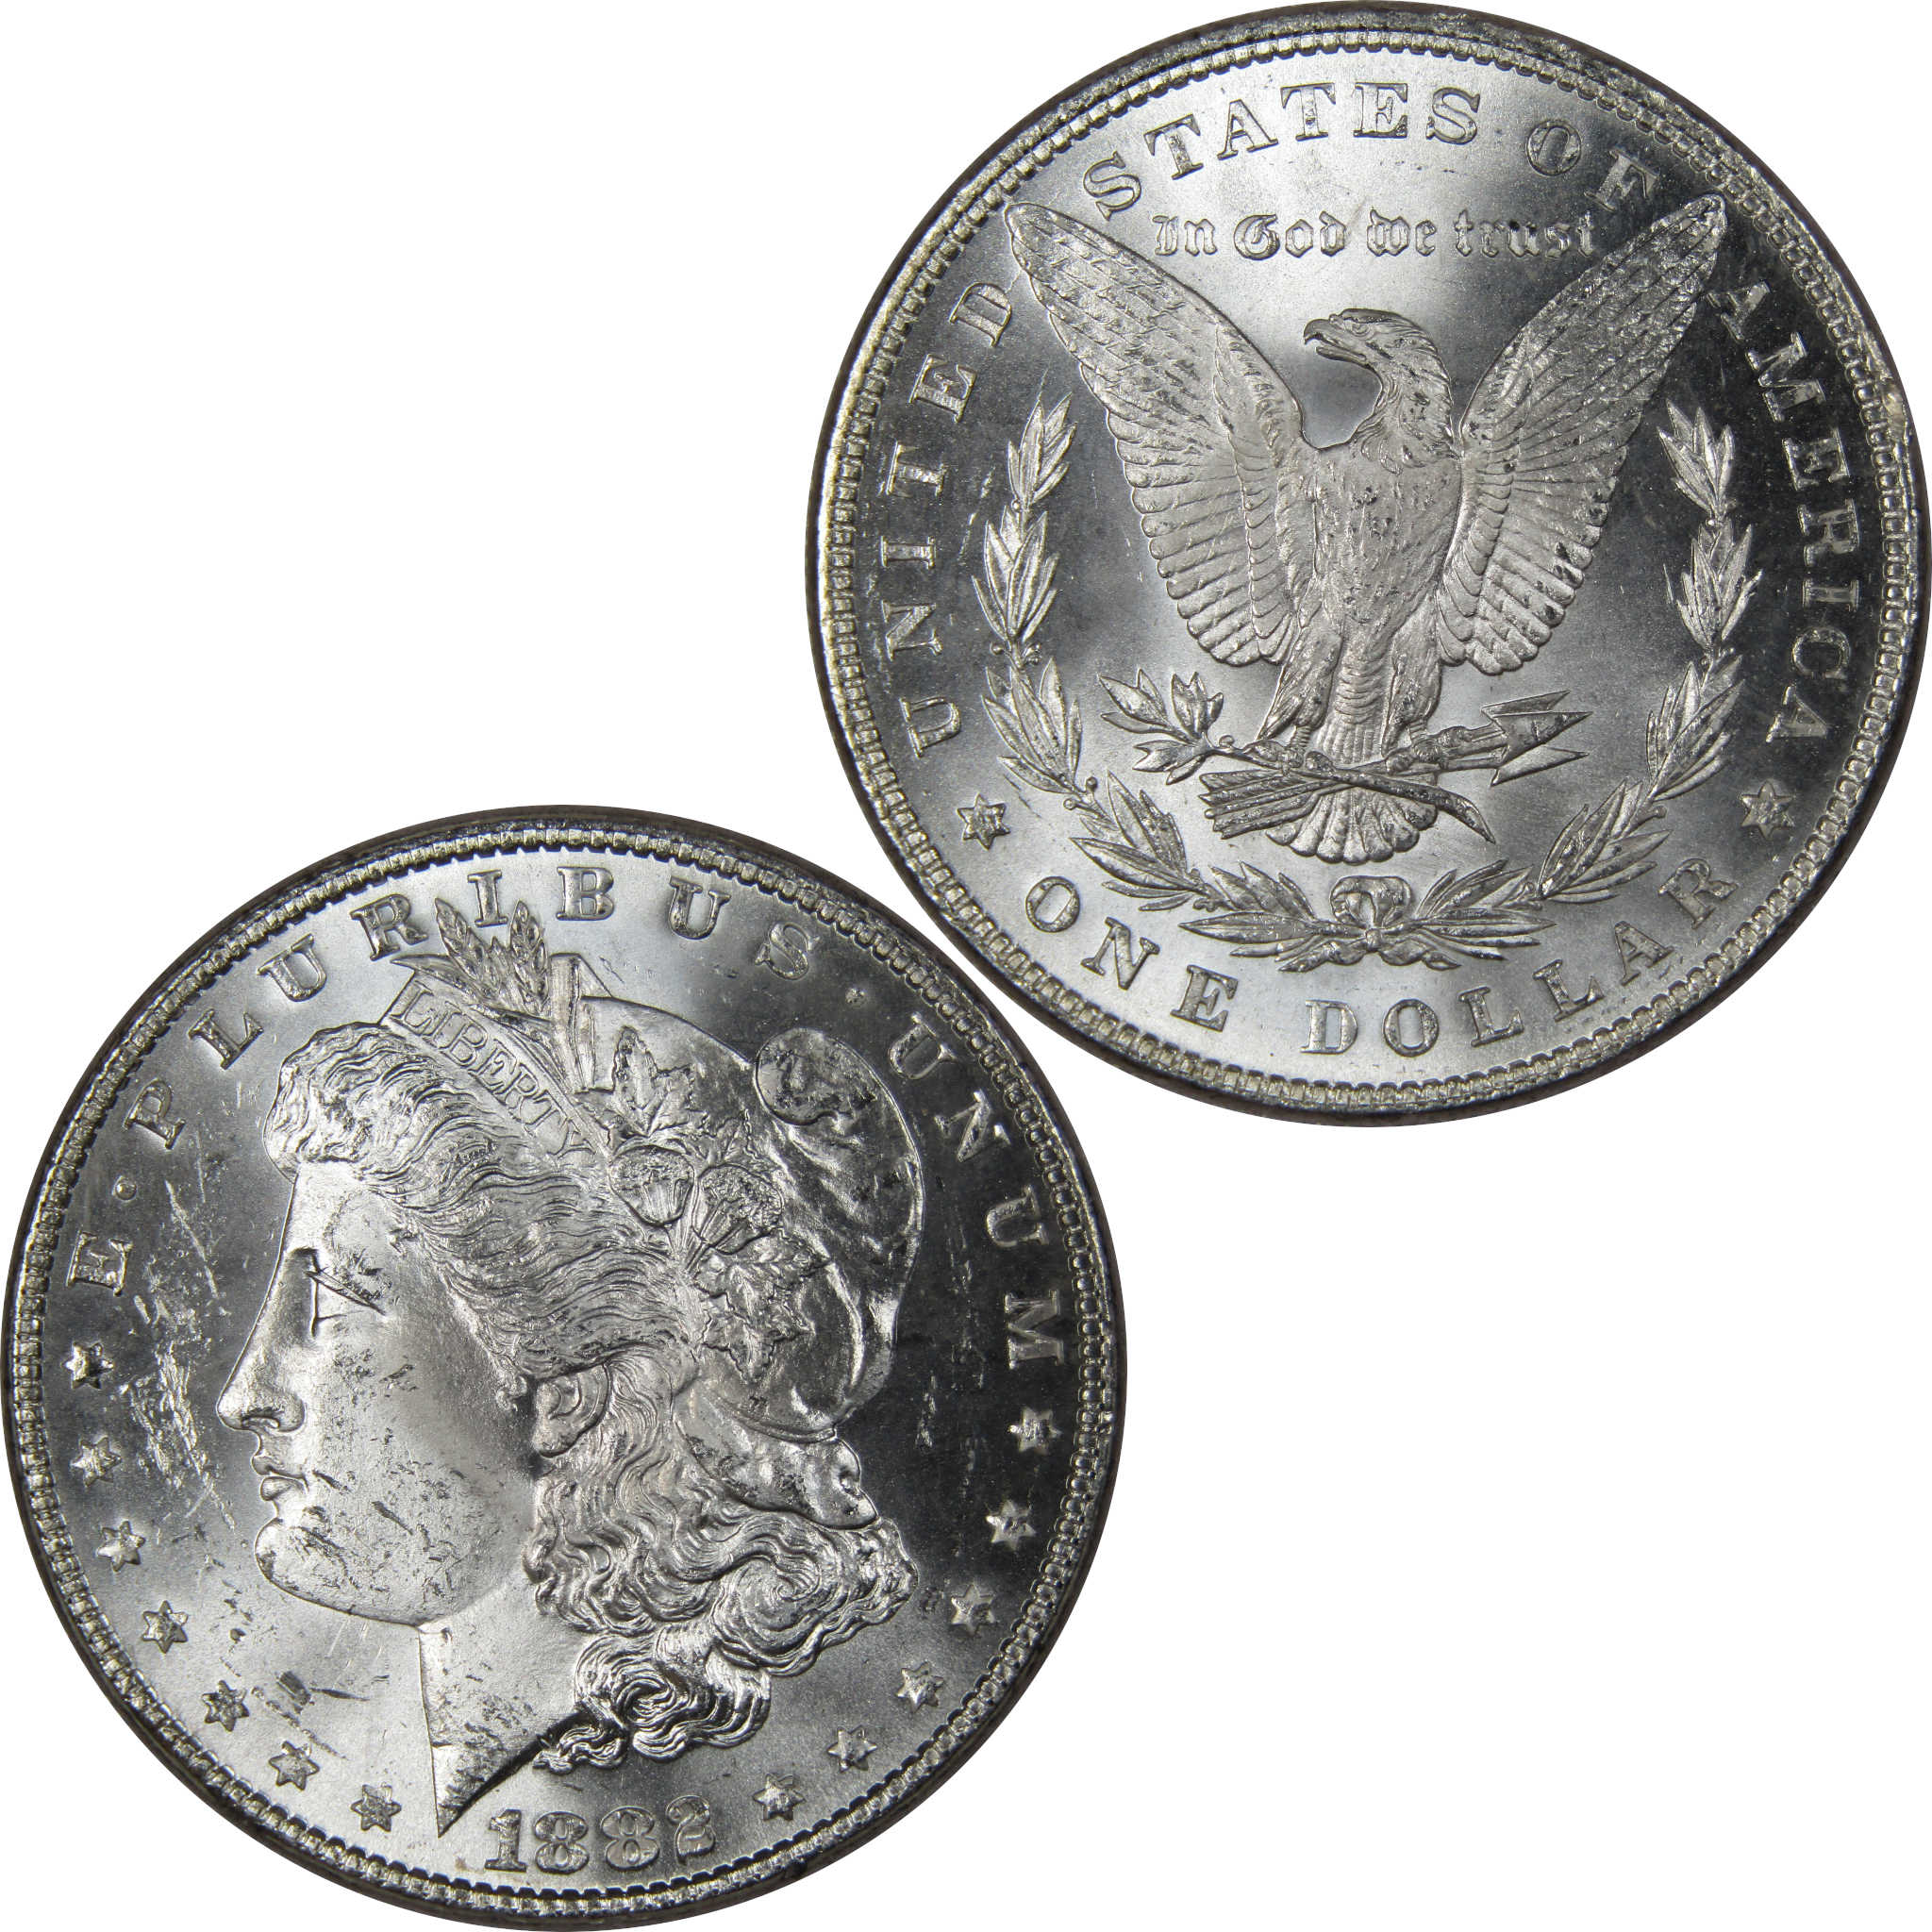 1882 Morgan Dollar BU Uncirculated Mint State 90% Silver SKU:IPC9702 - Morgan coin - Morgan silver dollar - Morgan silver dollar for sale - Profile Coins &amp; Collectibles